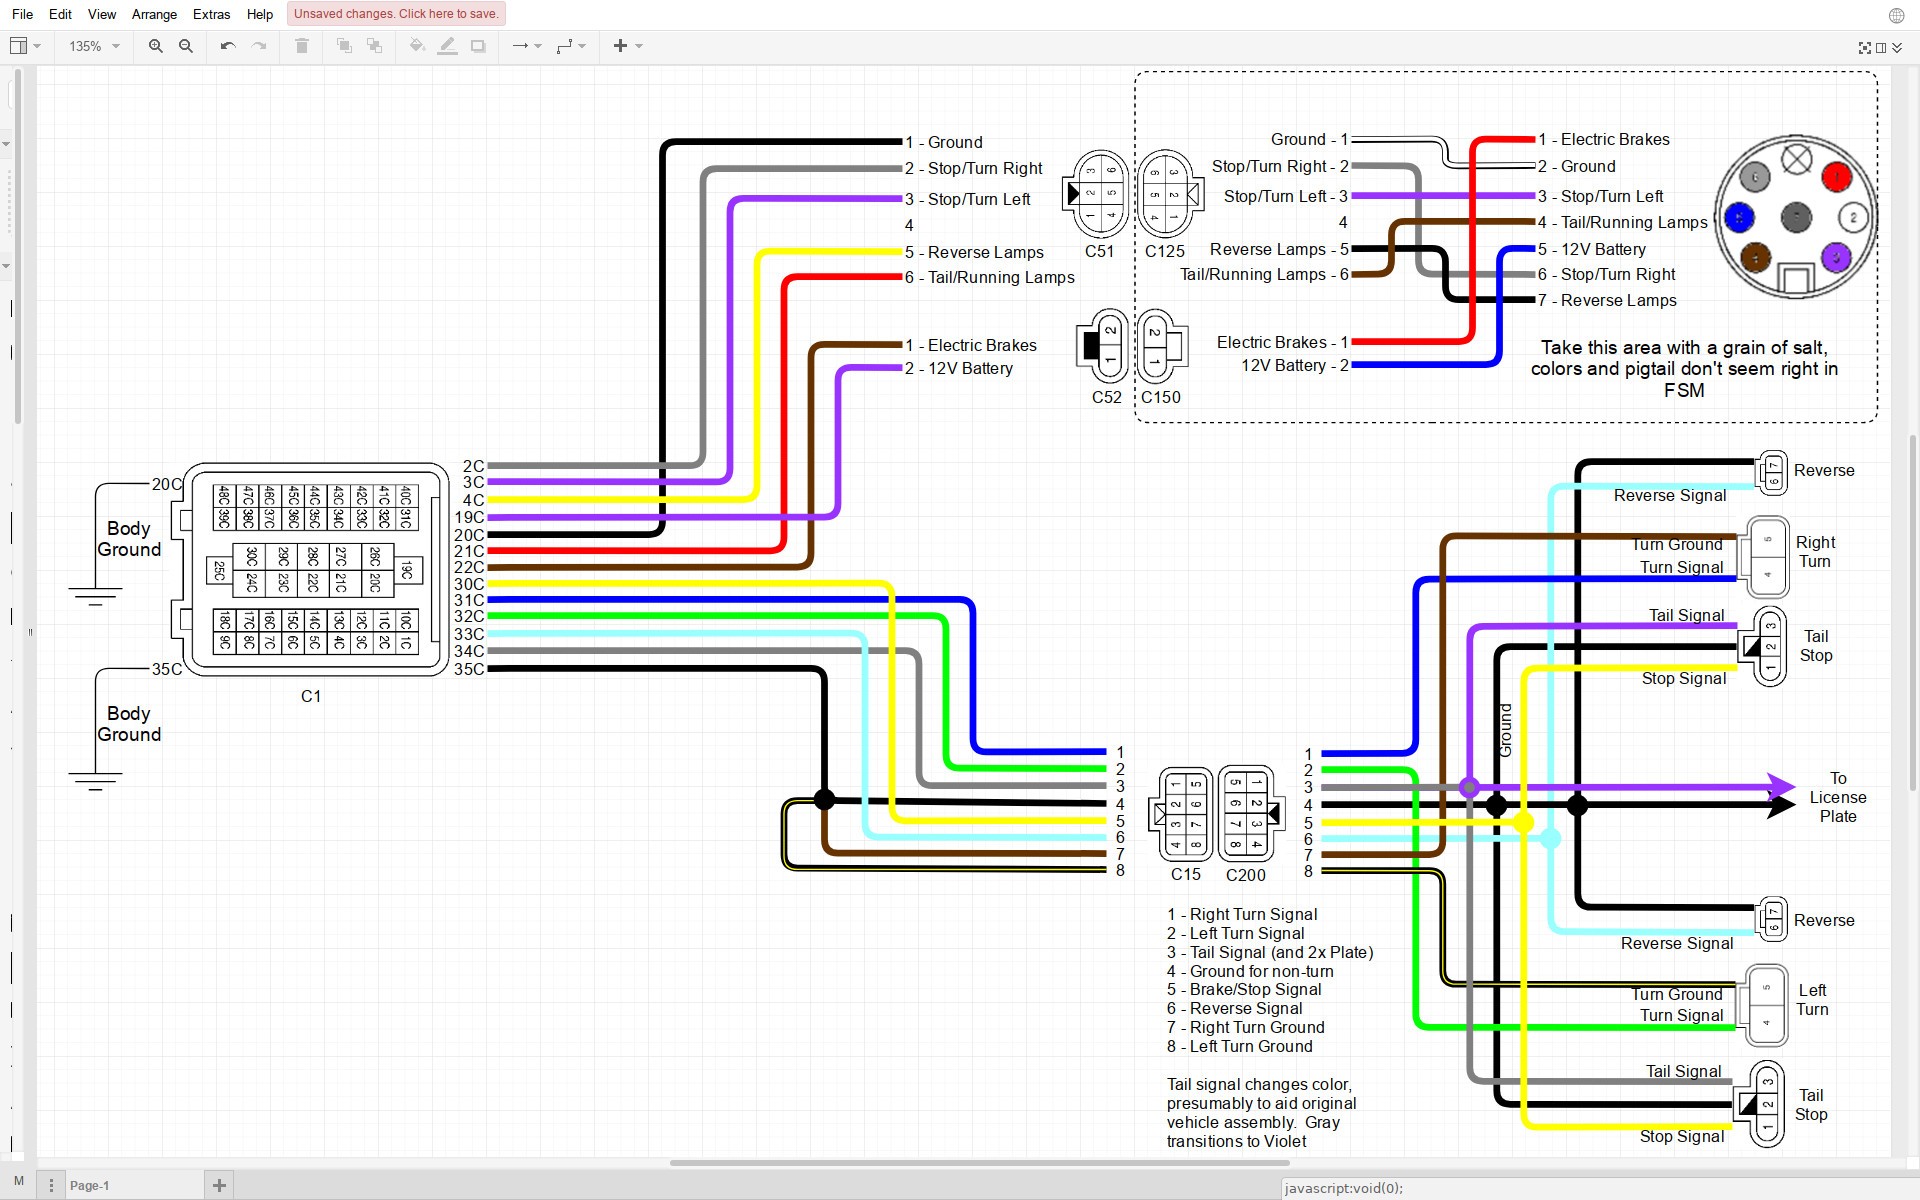 Wire Diaigram for 2011 2.5 Frontier Electrical Diagrams Nissan Frontier forum Of Wire Diaigram for 2011 2.5 Frontier